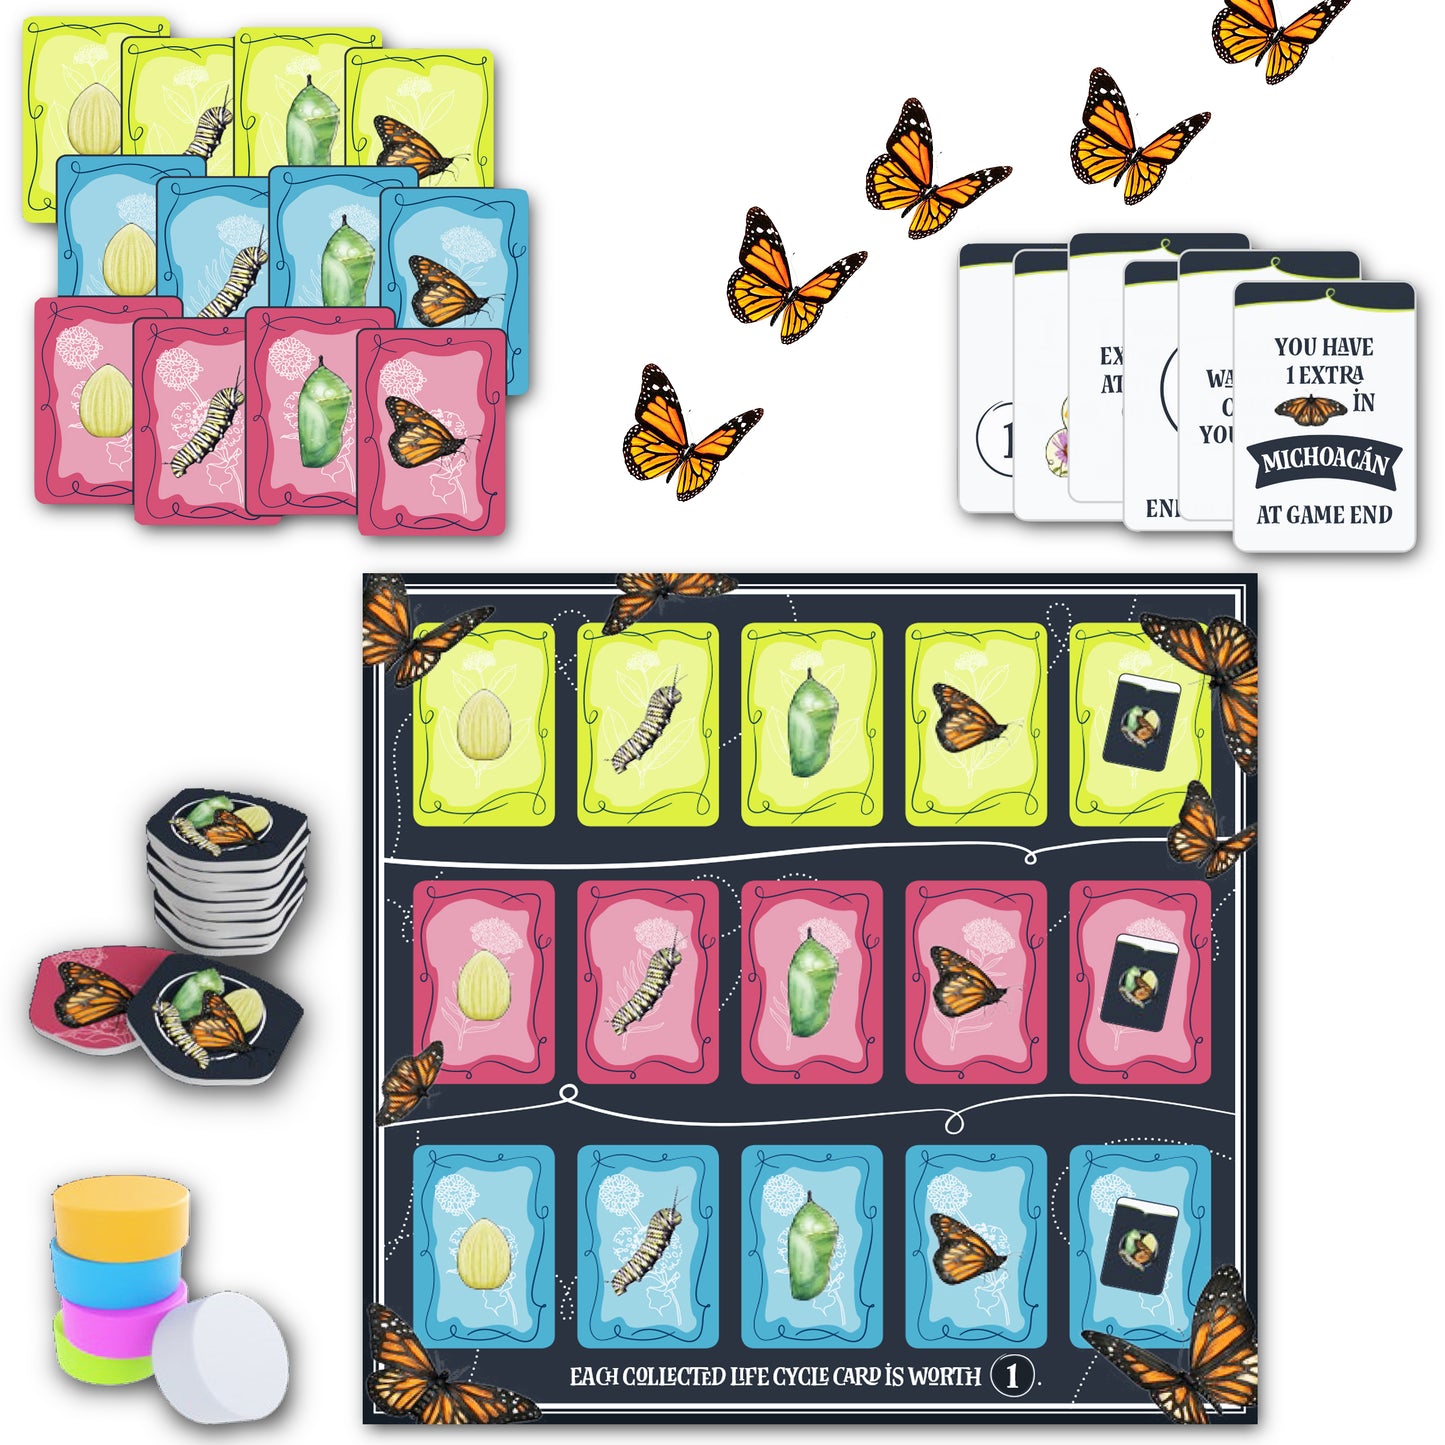 Butterfly - Mariposas - Board Game Bundle With Random Drawstring color Bag